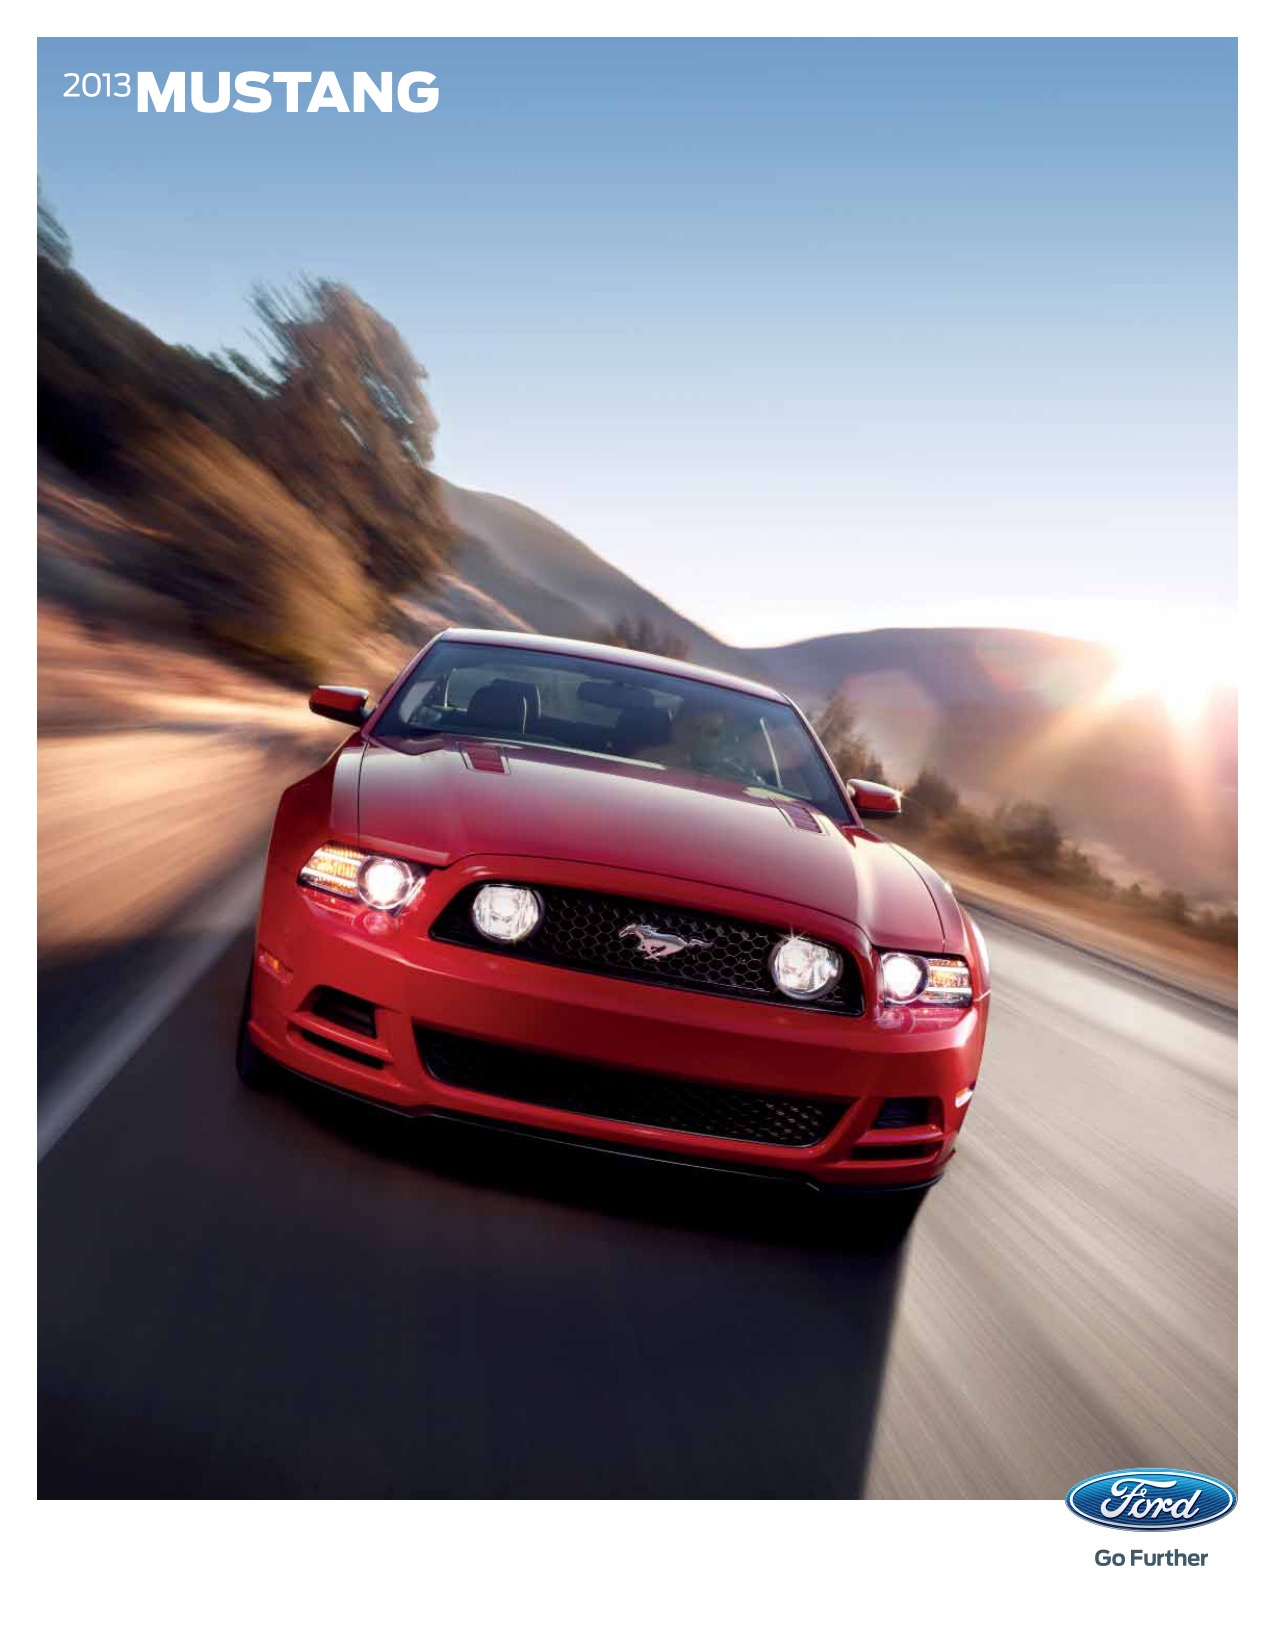 2013 Ford Mustang Brochure